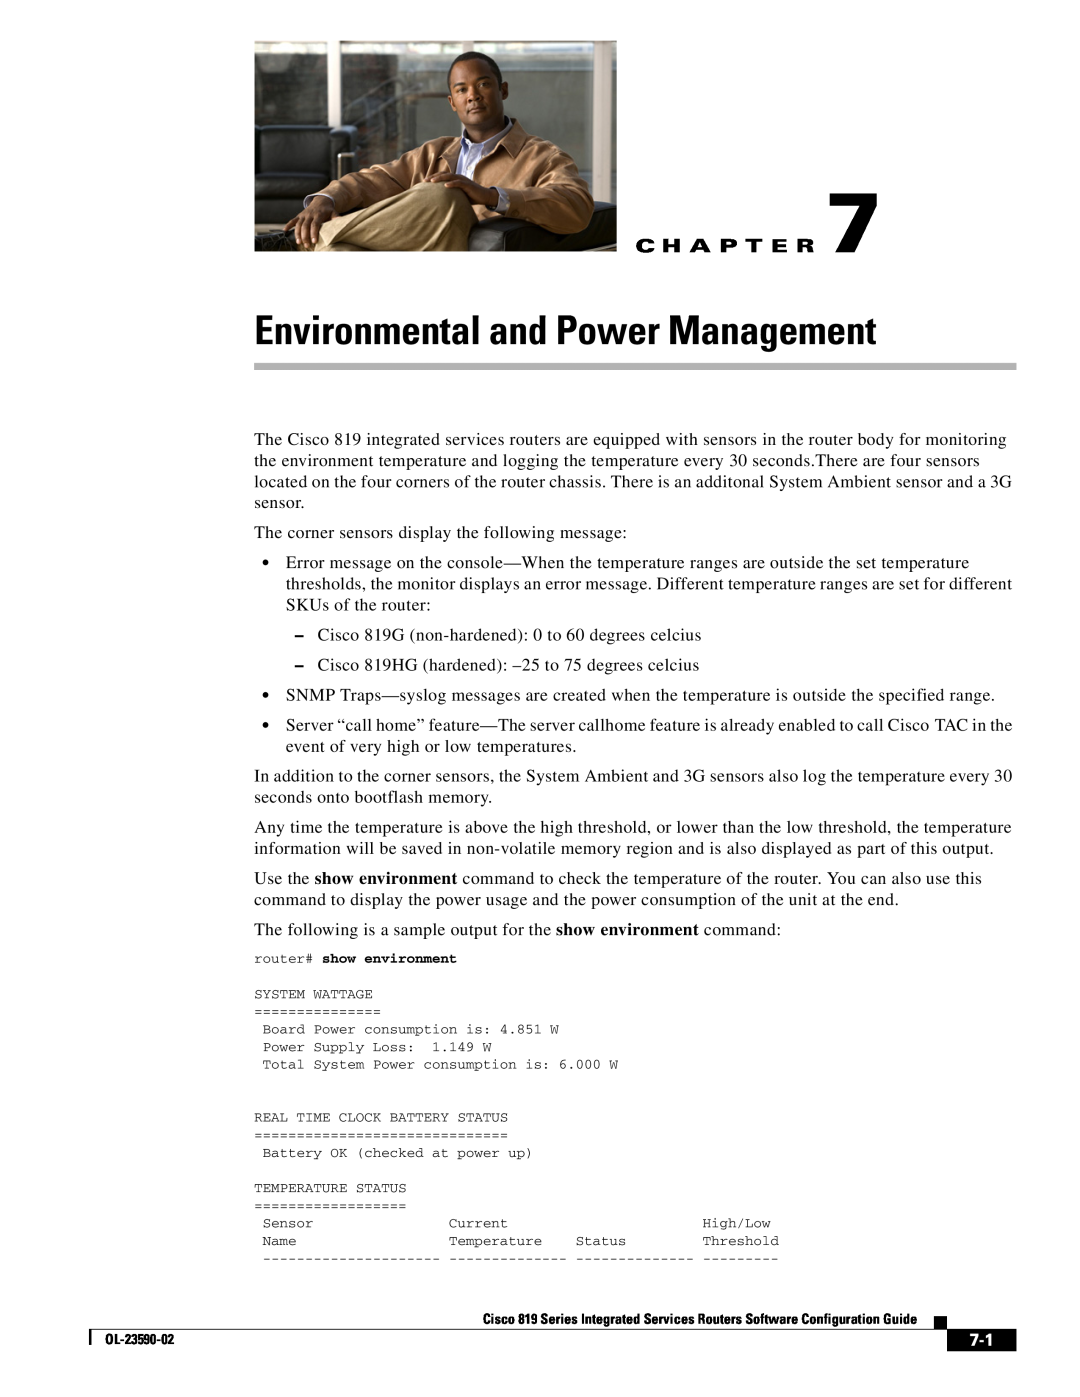 Cisco Systems C819HG4GVK9, C819GUK9 manual Environmental and Power Management, C H A P T E R 